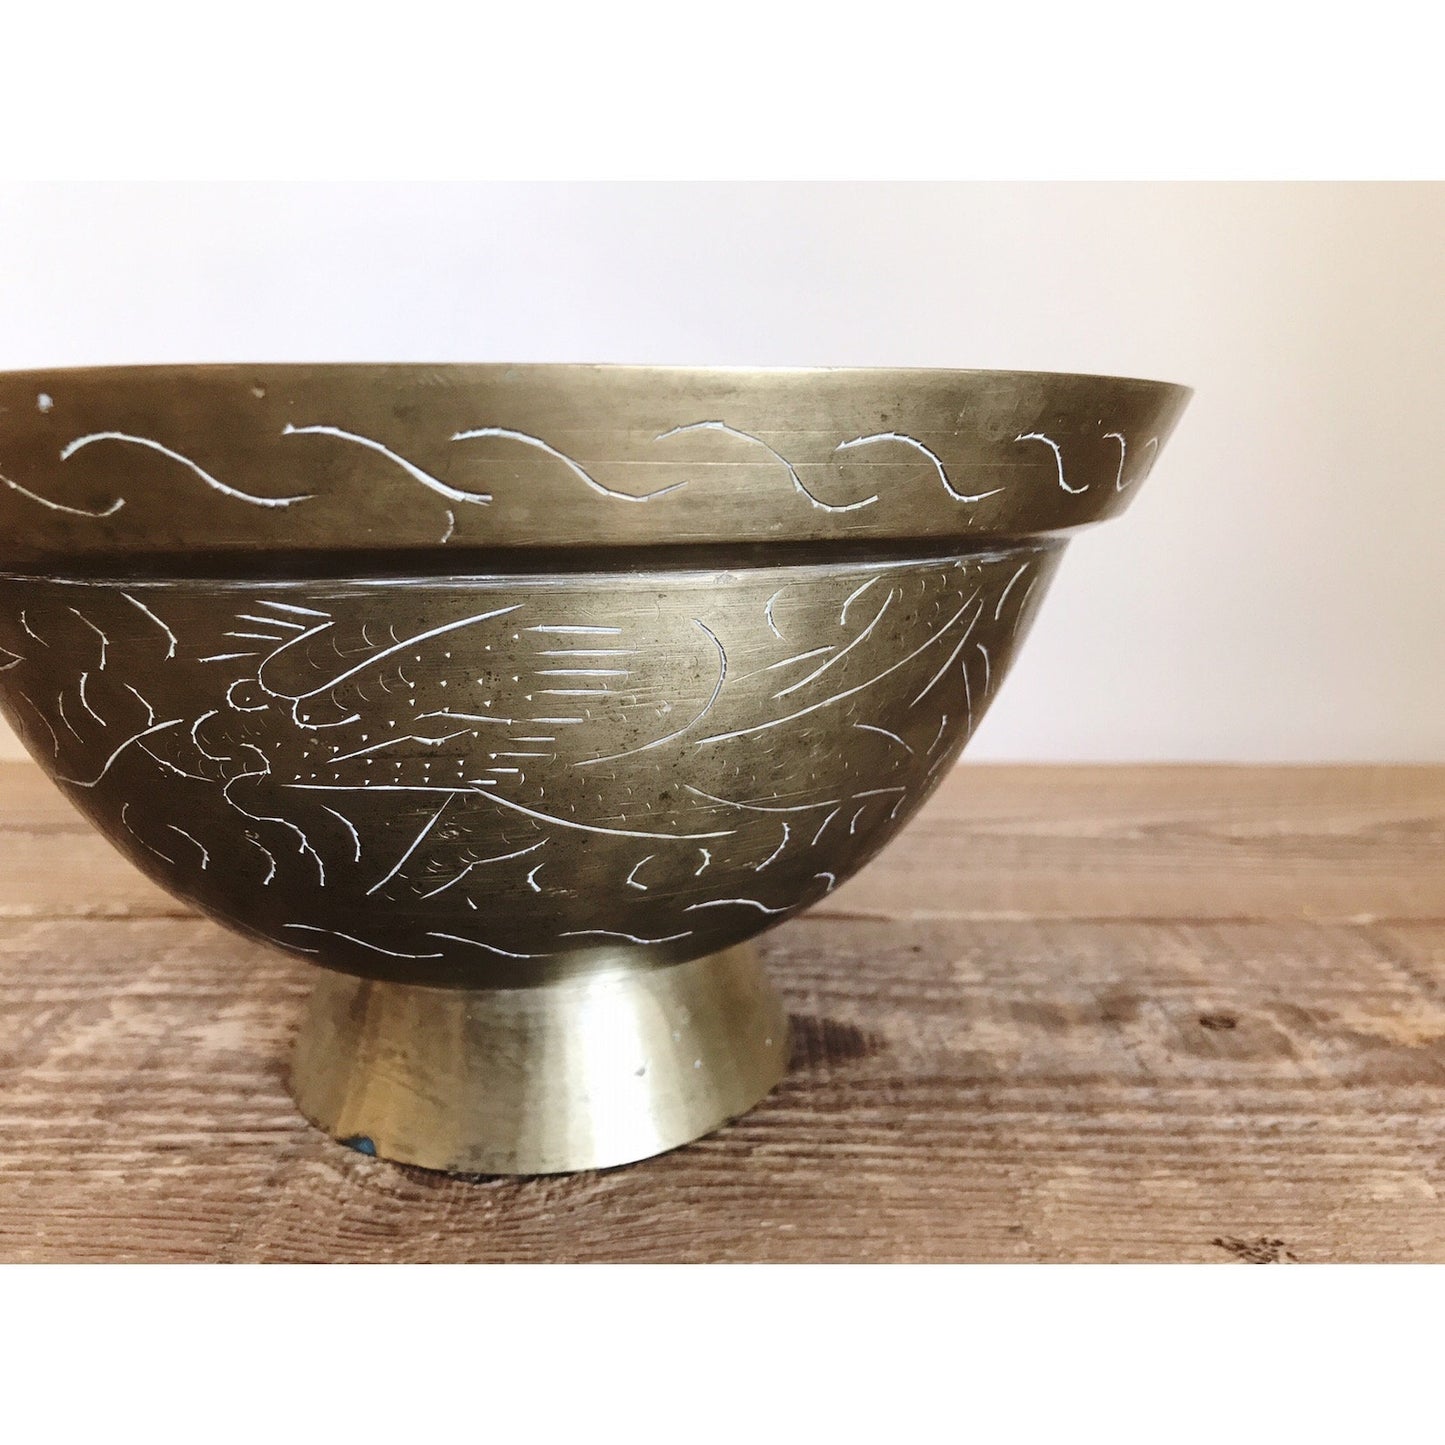 Etched Brass Footed Bowl / Decorative Brass Bowl